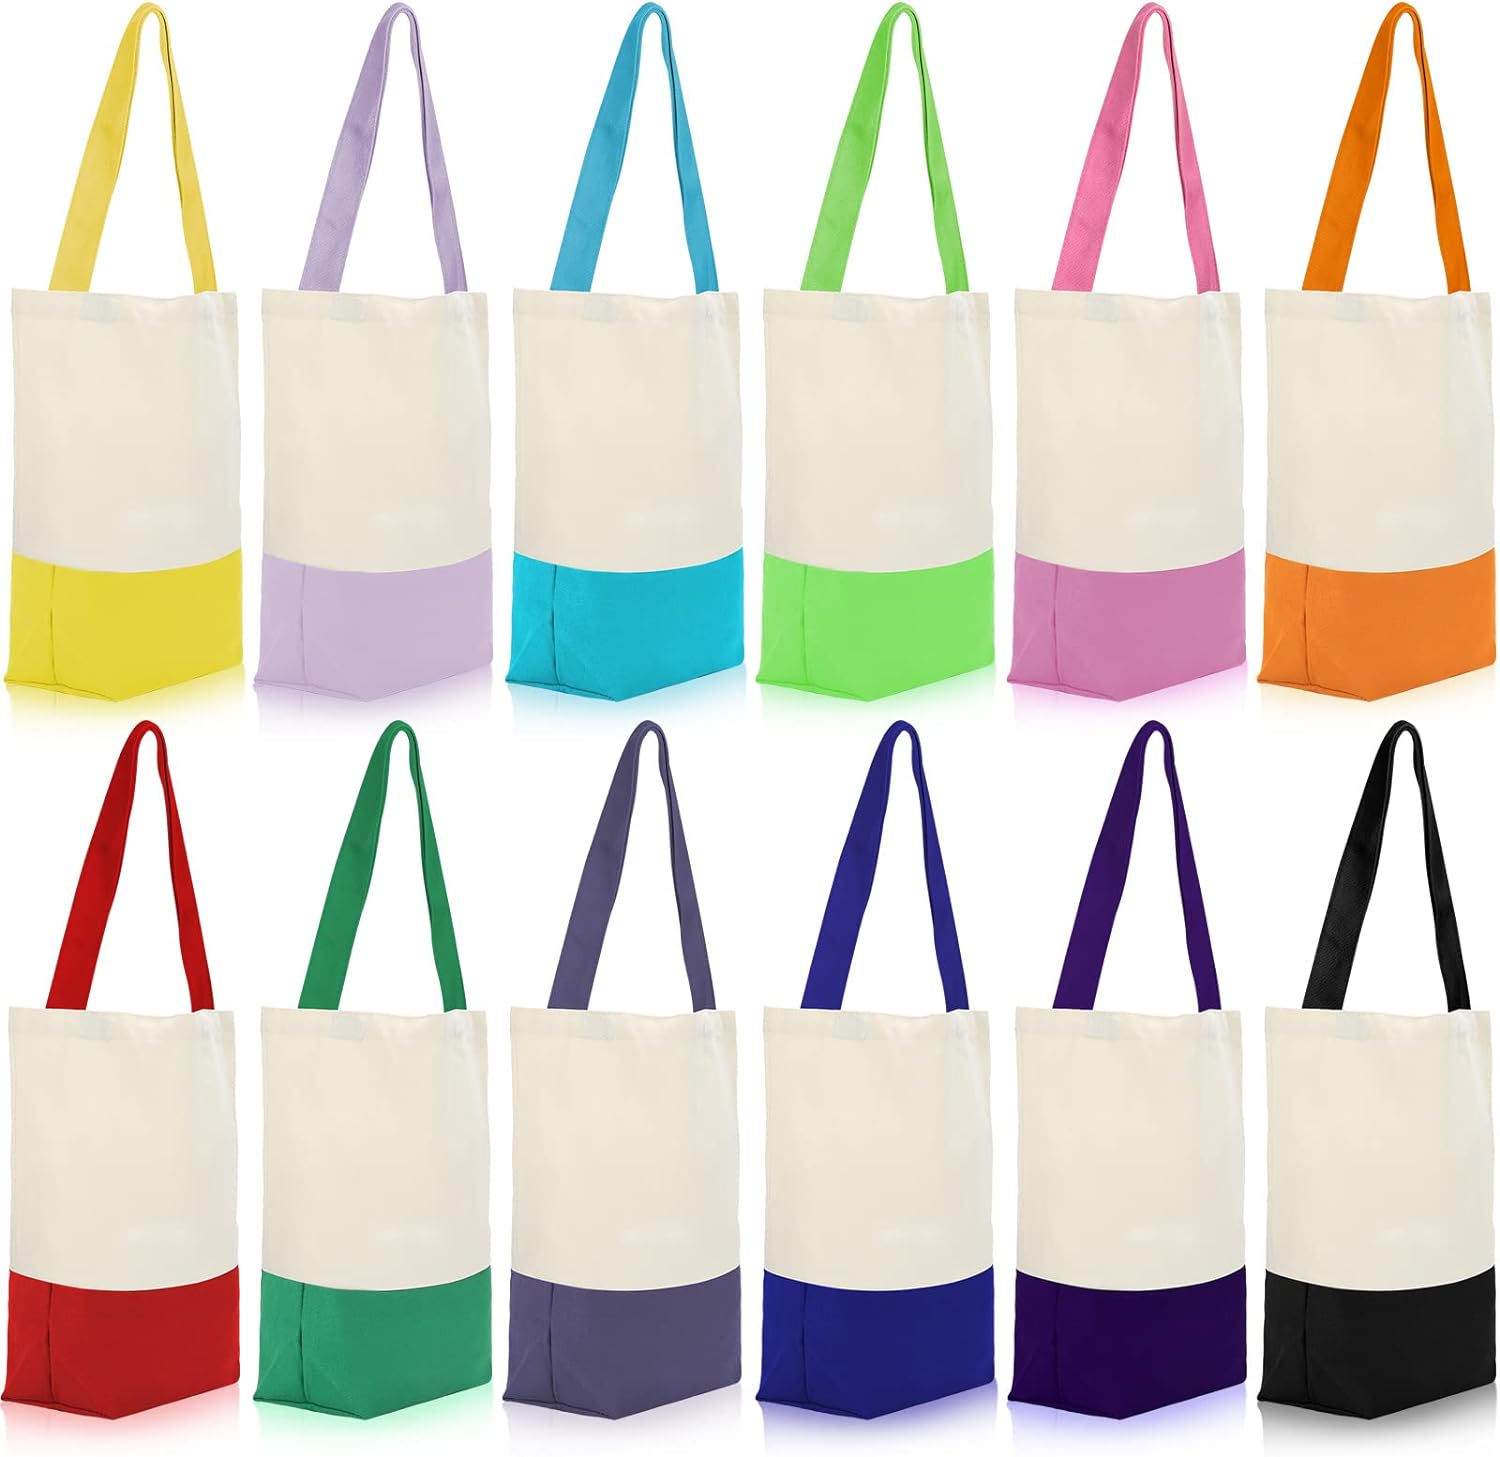 12 Pack Canvas Tote Bags 17 x 14 x 4 Inches Cotton Grocery Reusable Shopping Bags with Long Handles for Women Men Kitchen Beach DIY Crafting Multipurpose Totes Set, 12 Colors, Ordinary Style